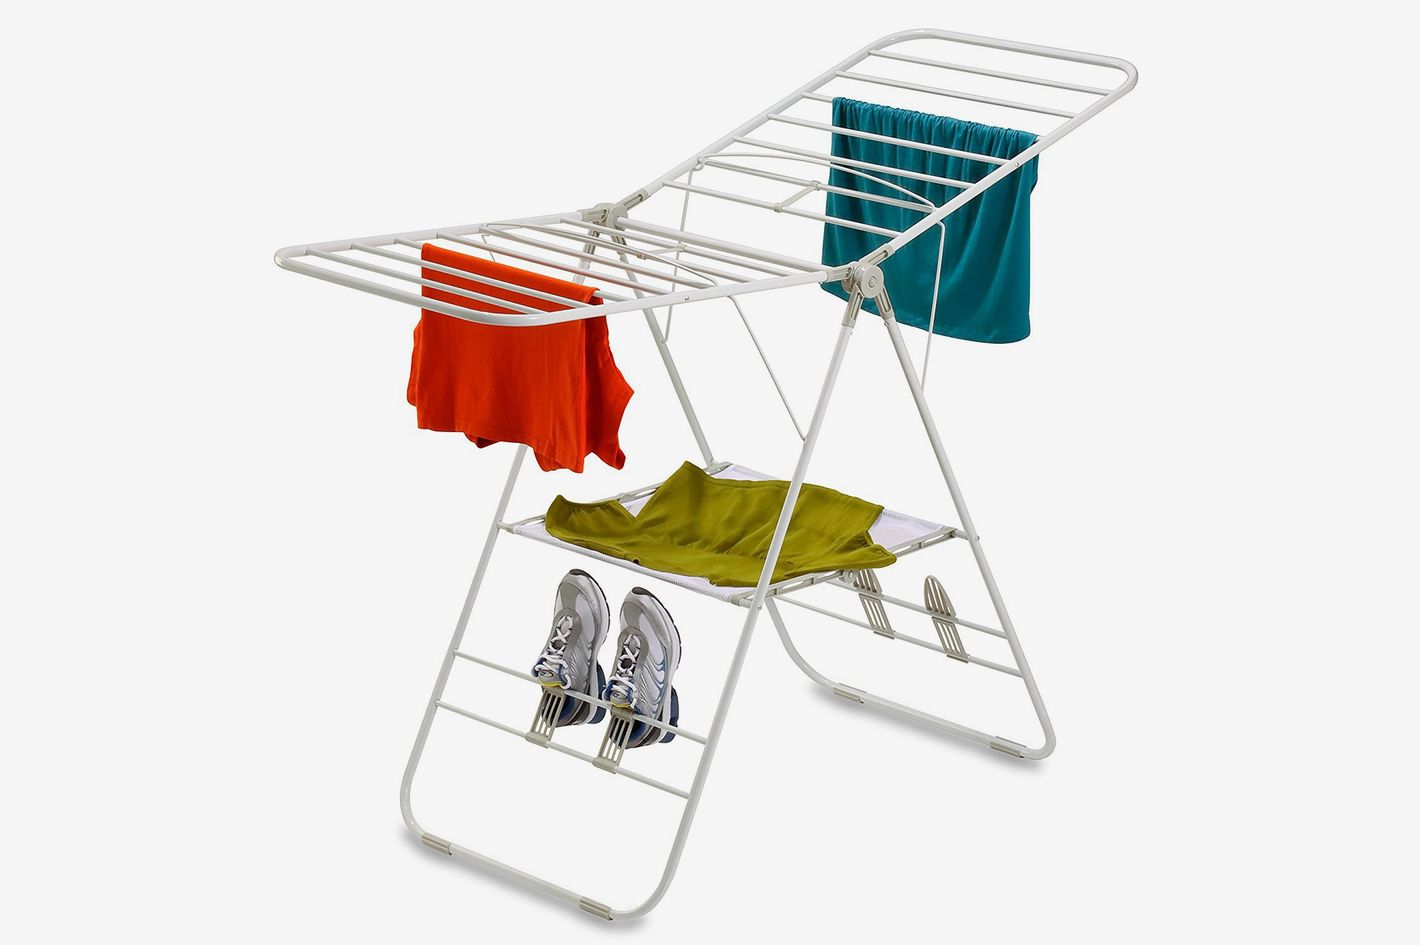 2 3 4 Fold Airer Clothes Drying Rack Folding Laundry Horse Holder Rotary Airers